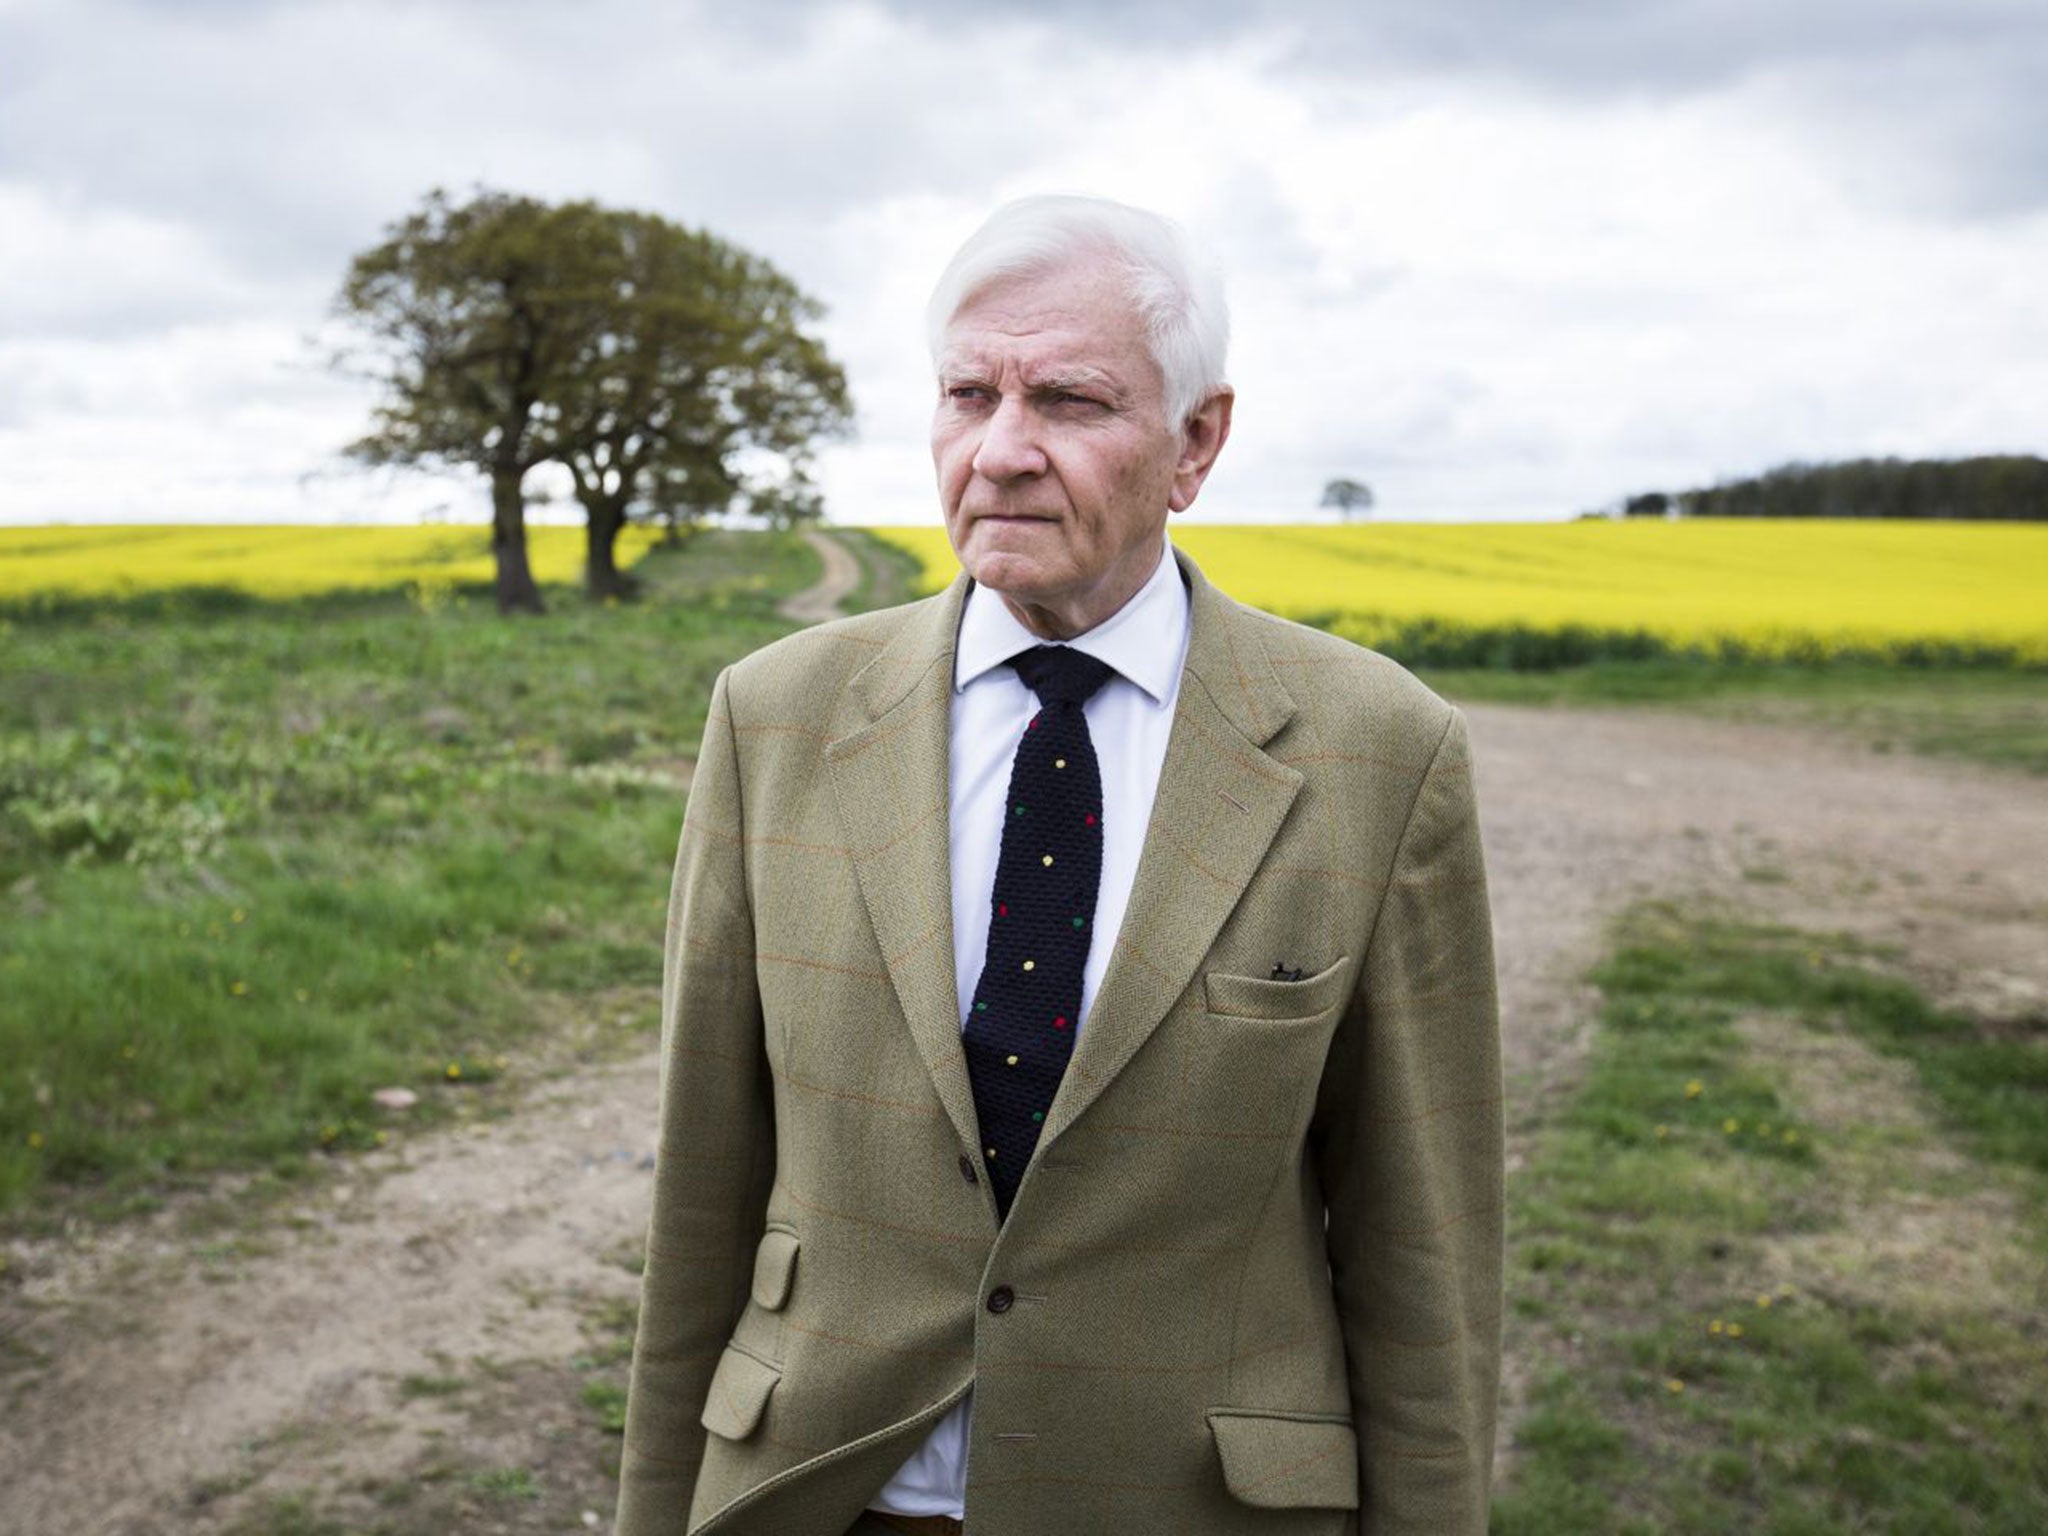 &#13;
Former Tory MP Harvey Proctor said the complainant whose claims led to the investigation should be prosecuted &#13;